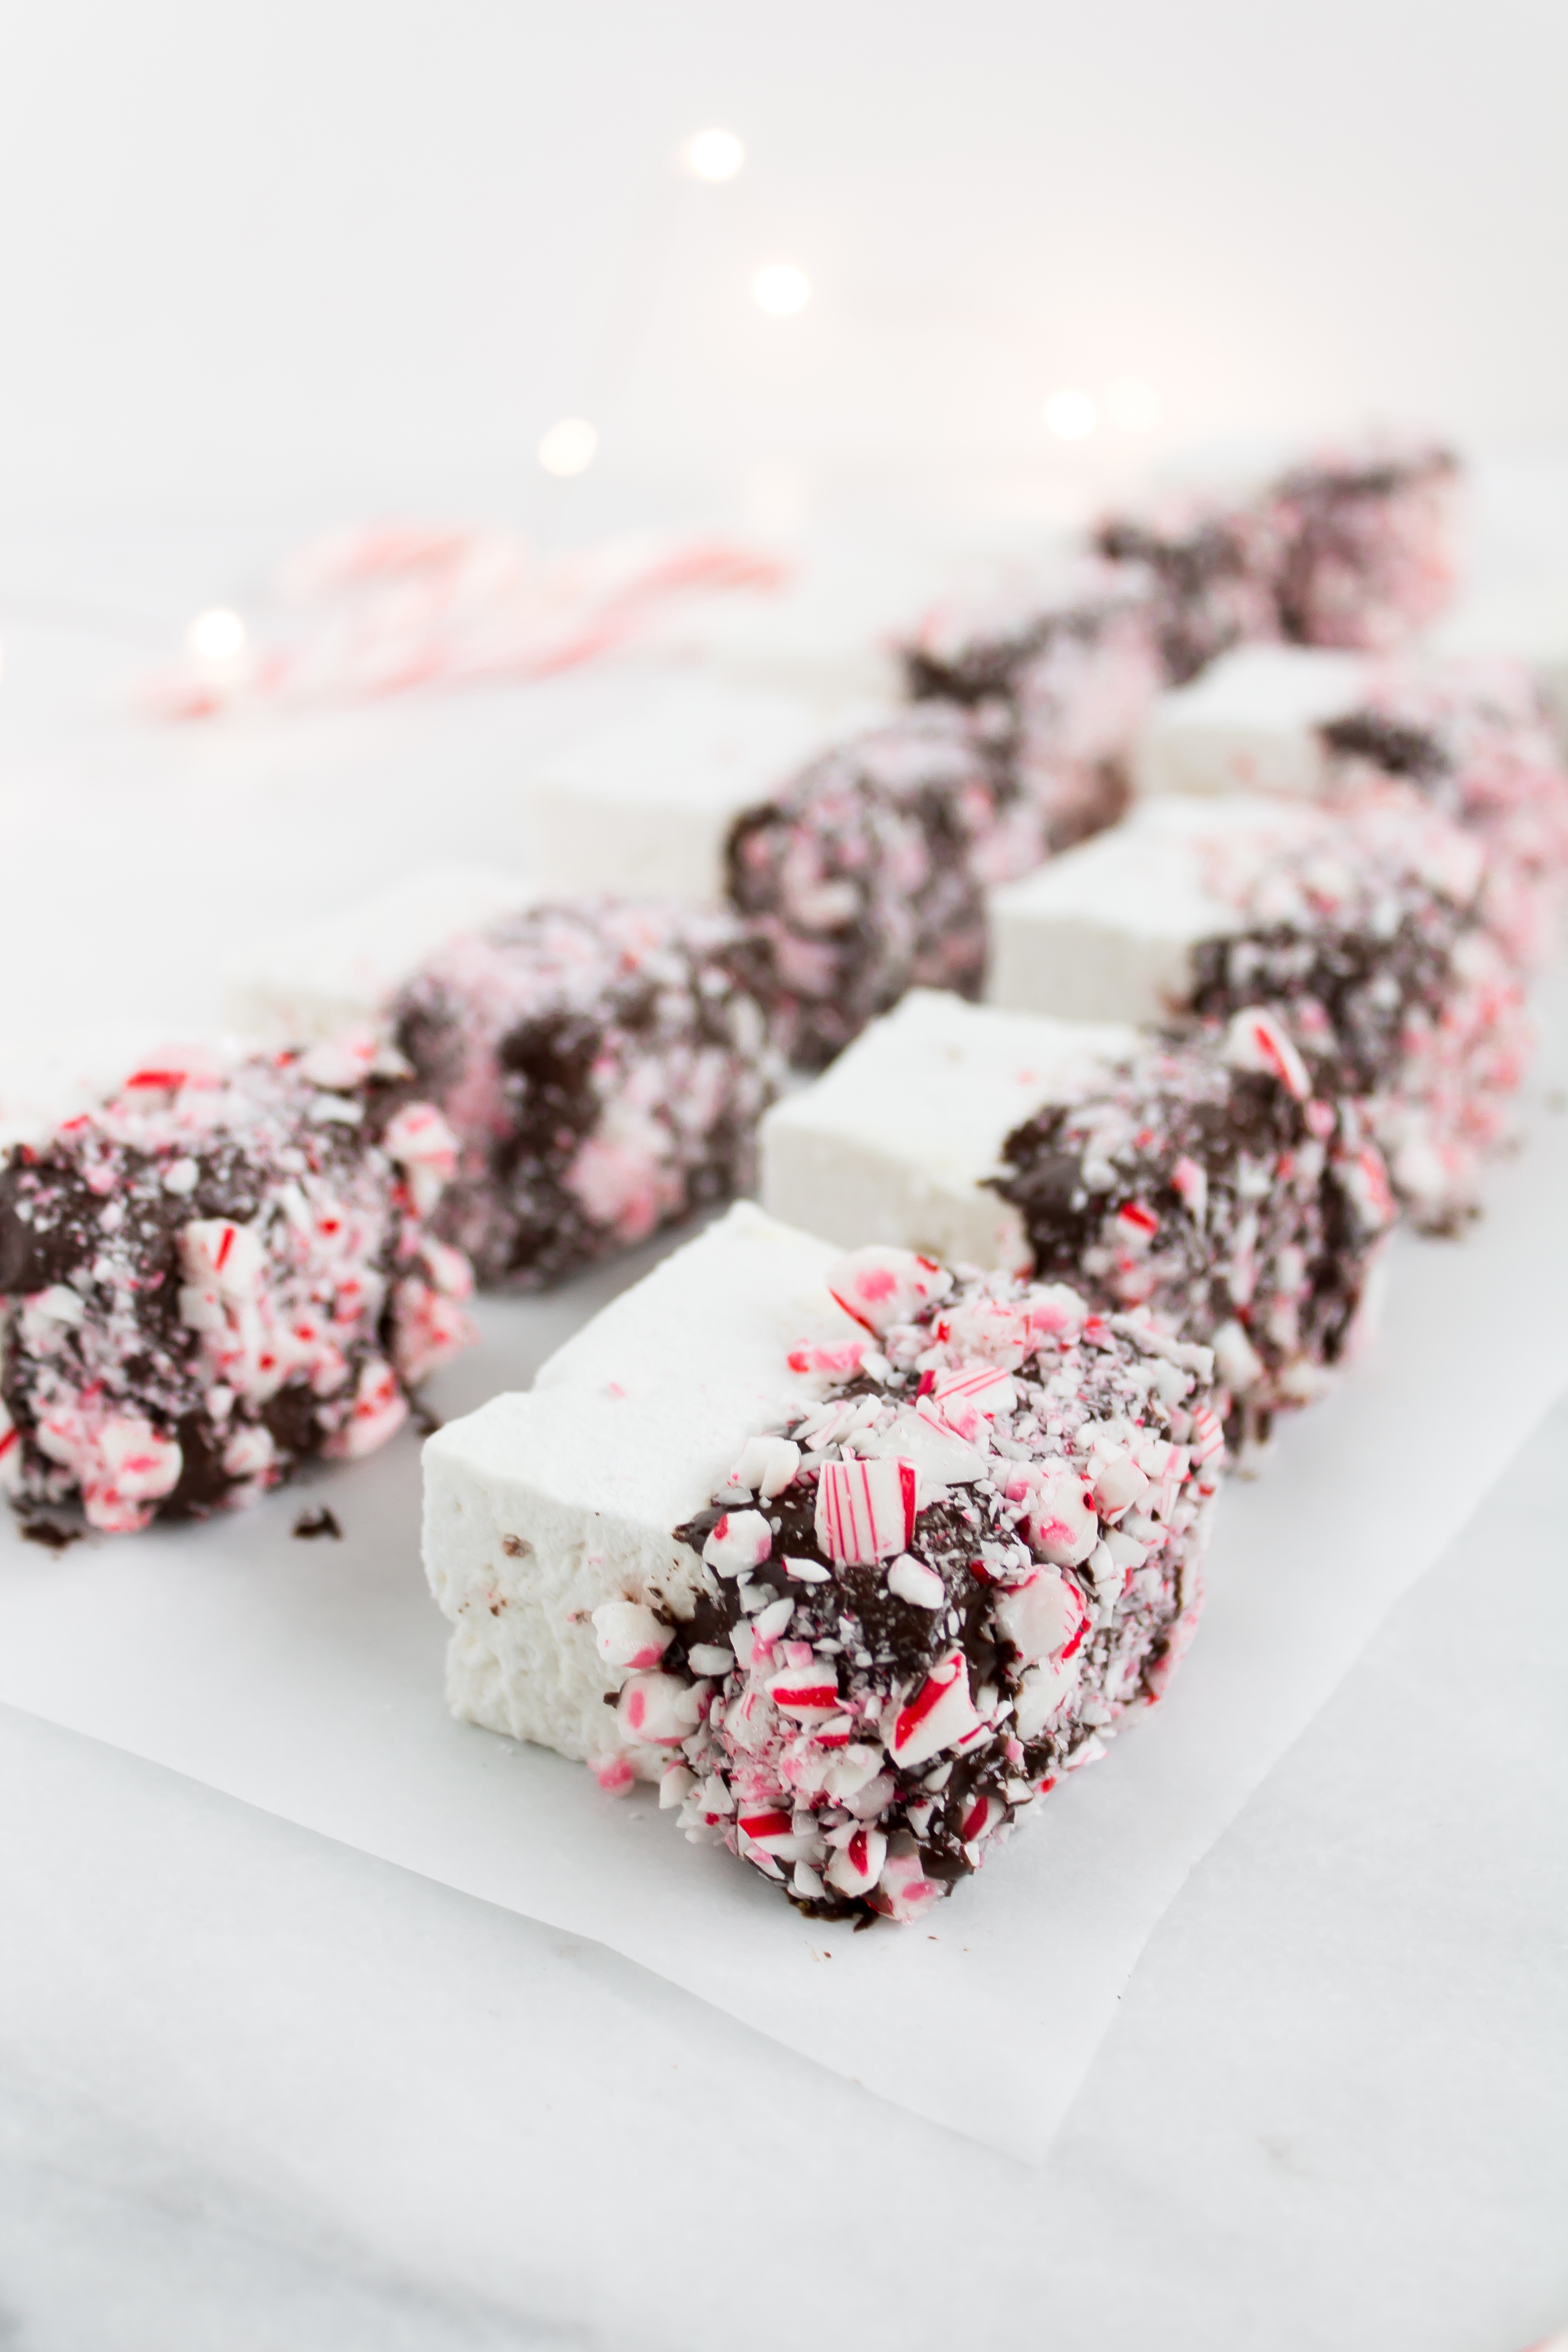 There's nothing like homemade marshmallows. Dipping those fluffy marshmallows in chocolate and crushed peppermint for the holidays is just the icing on the cake ... errr, marshmallow. Click through for the recipe. | glitterinc.com | @glitterinc - Homemade Chocolate Covered Marshmallows with Crushed Peppermint by North Carolina foodie blogger Glitter, Inc.